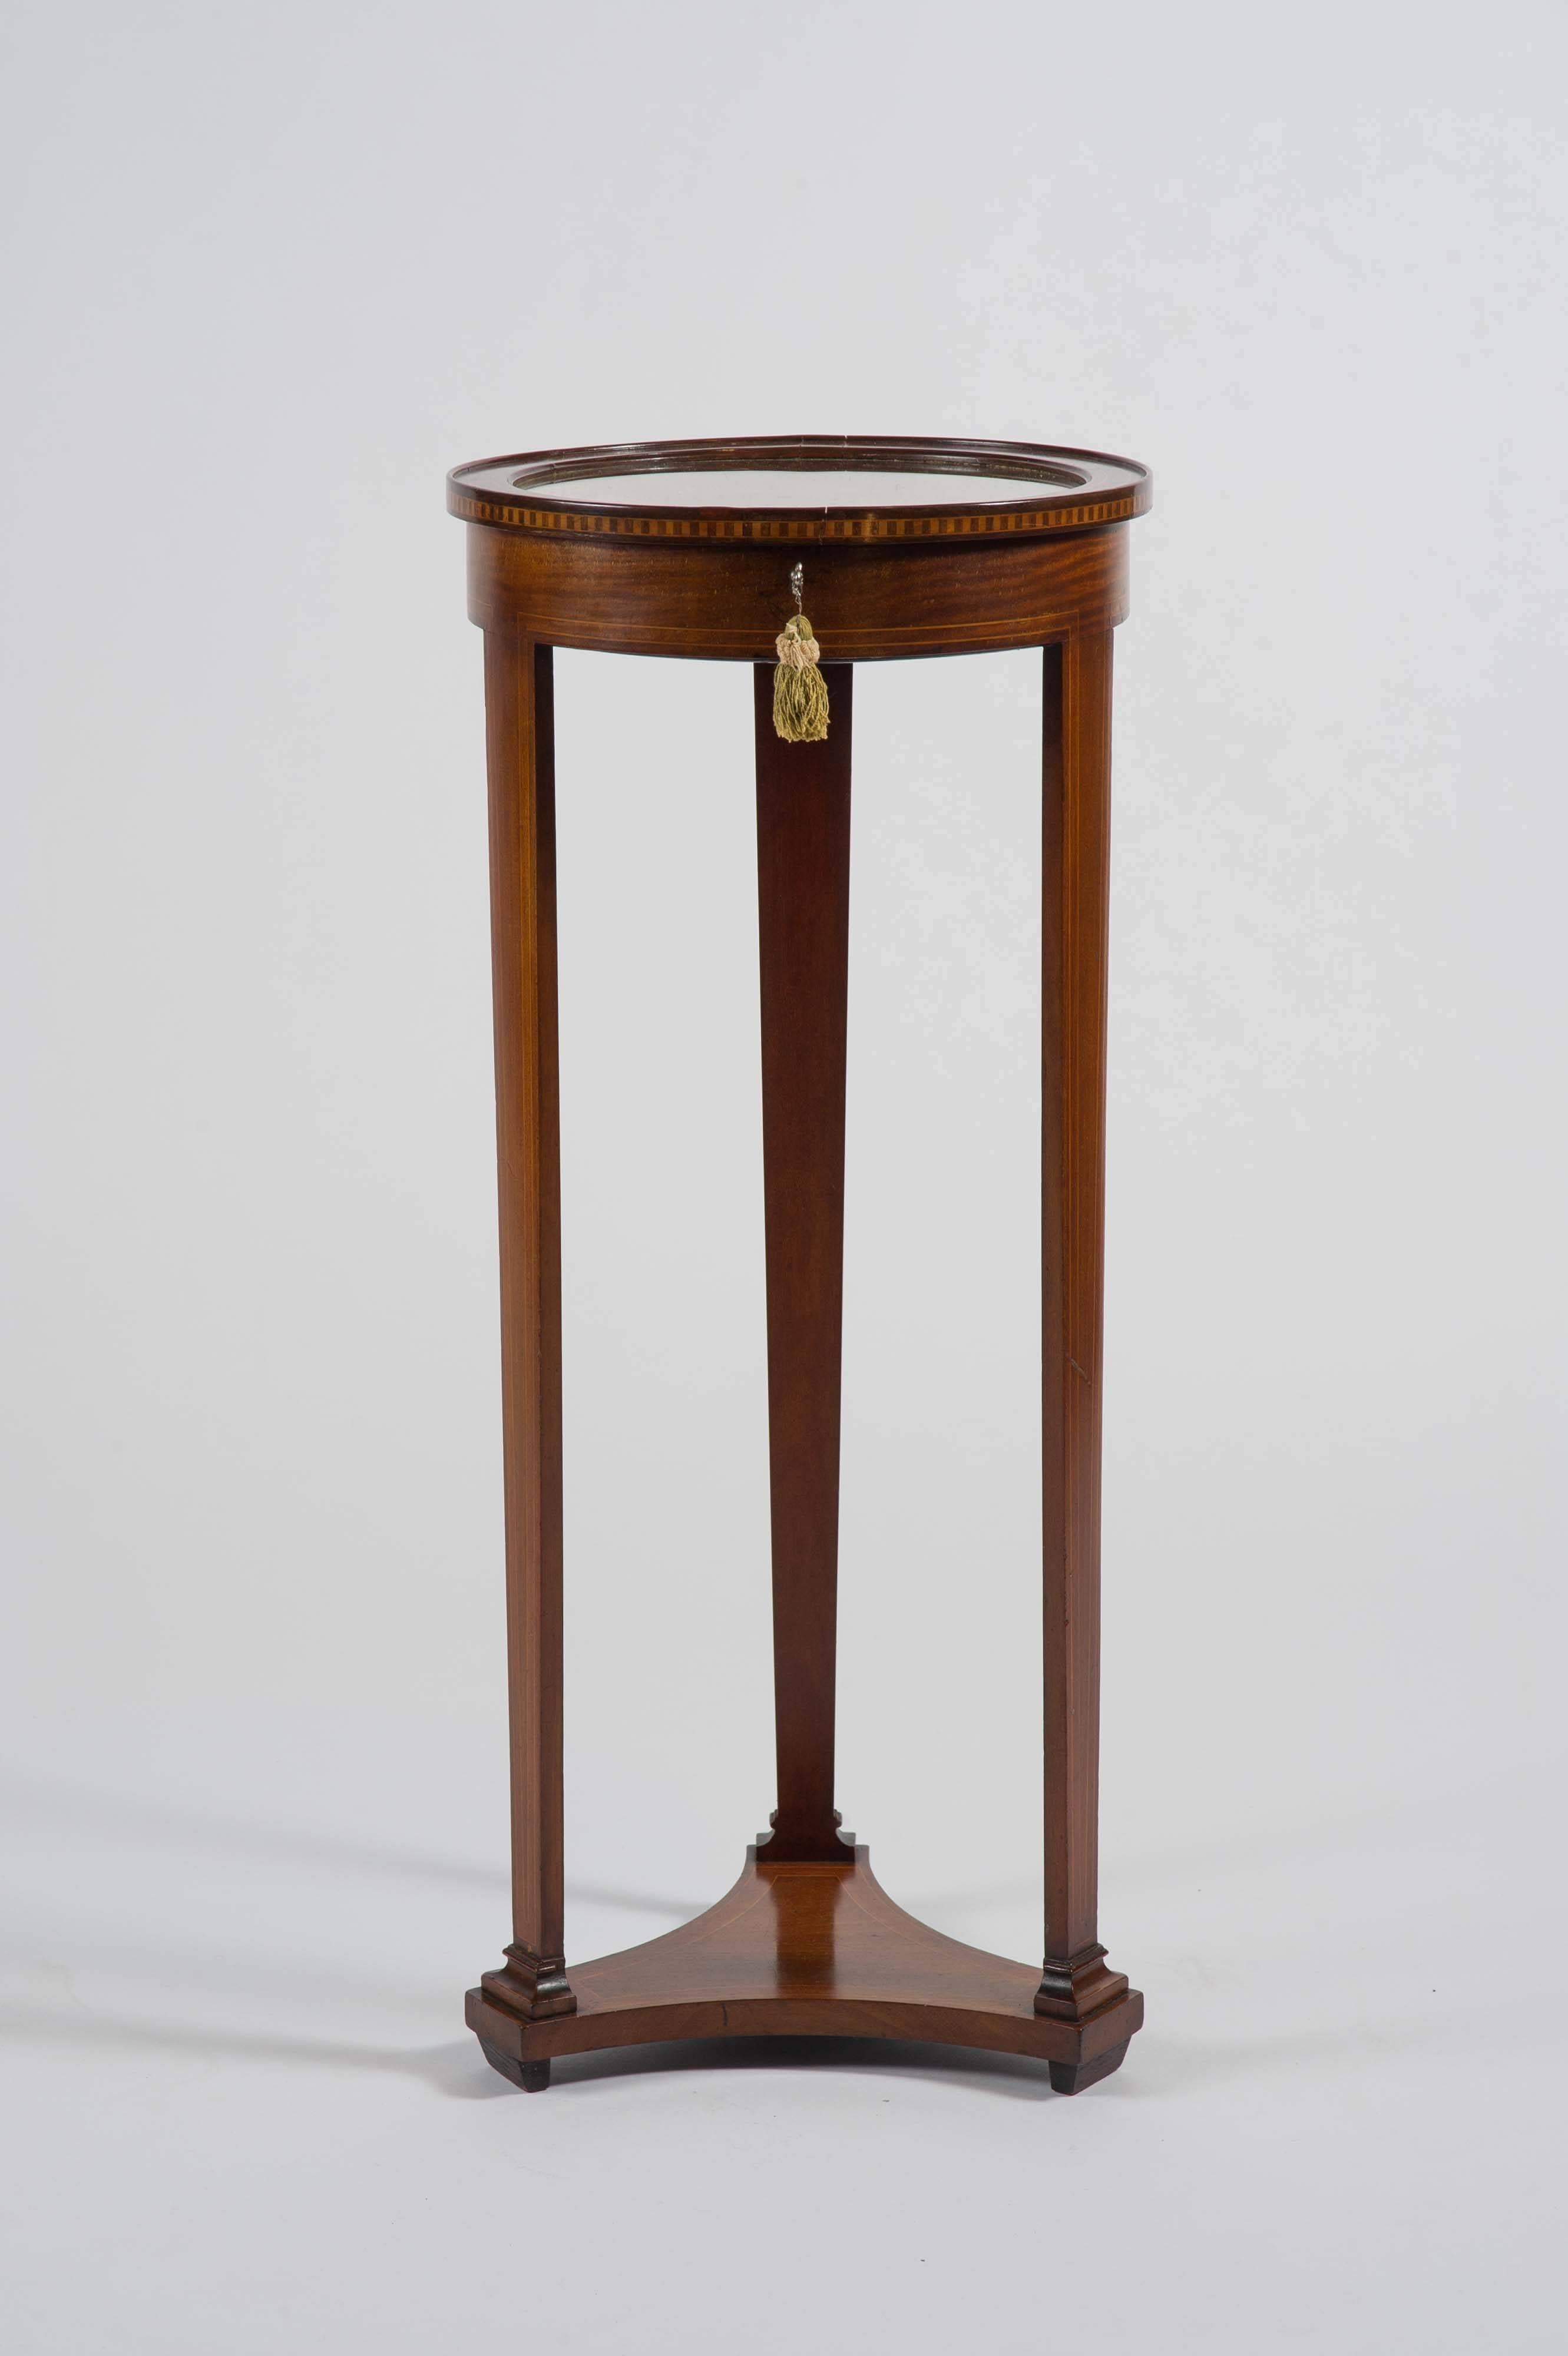 This delightful Edwardian table of mahogany with box wood stringing and inlay throughout of circular form, on three pillar legs and platform base. Lined with gold velvet, with working lock and key. Ideal for a watch, jewelry or cufflink collection.